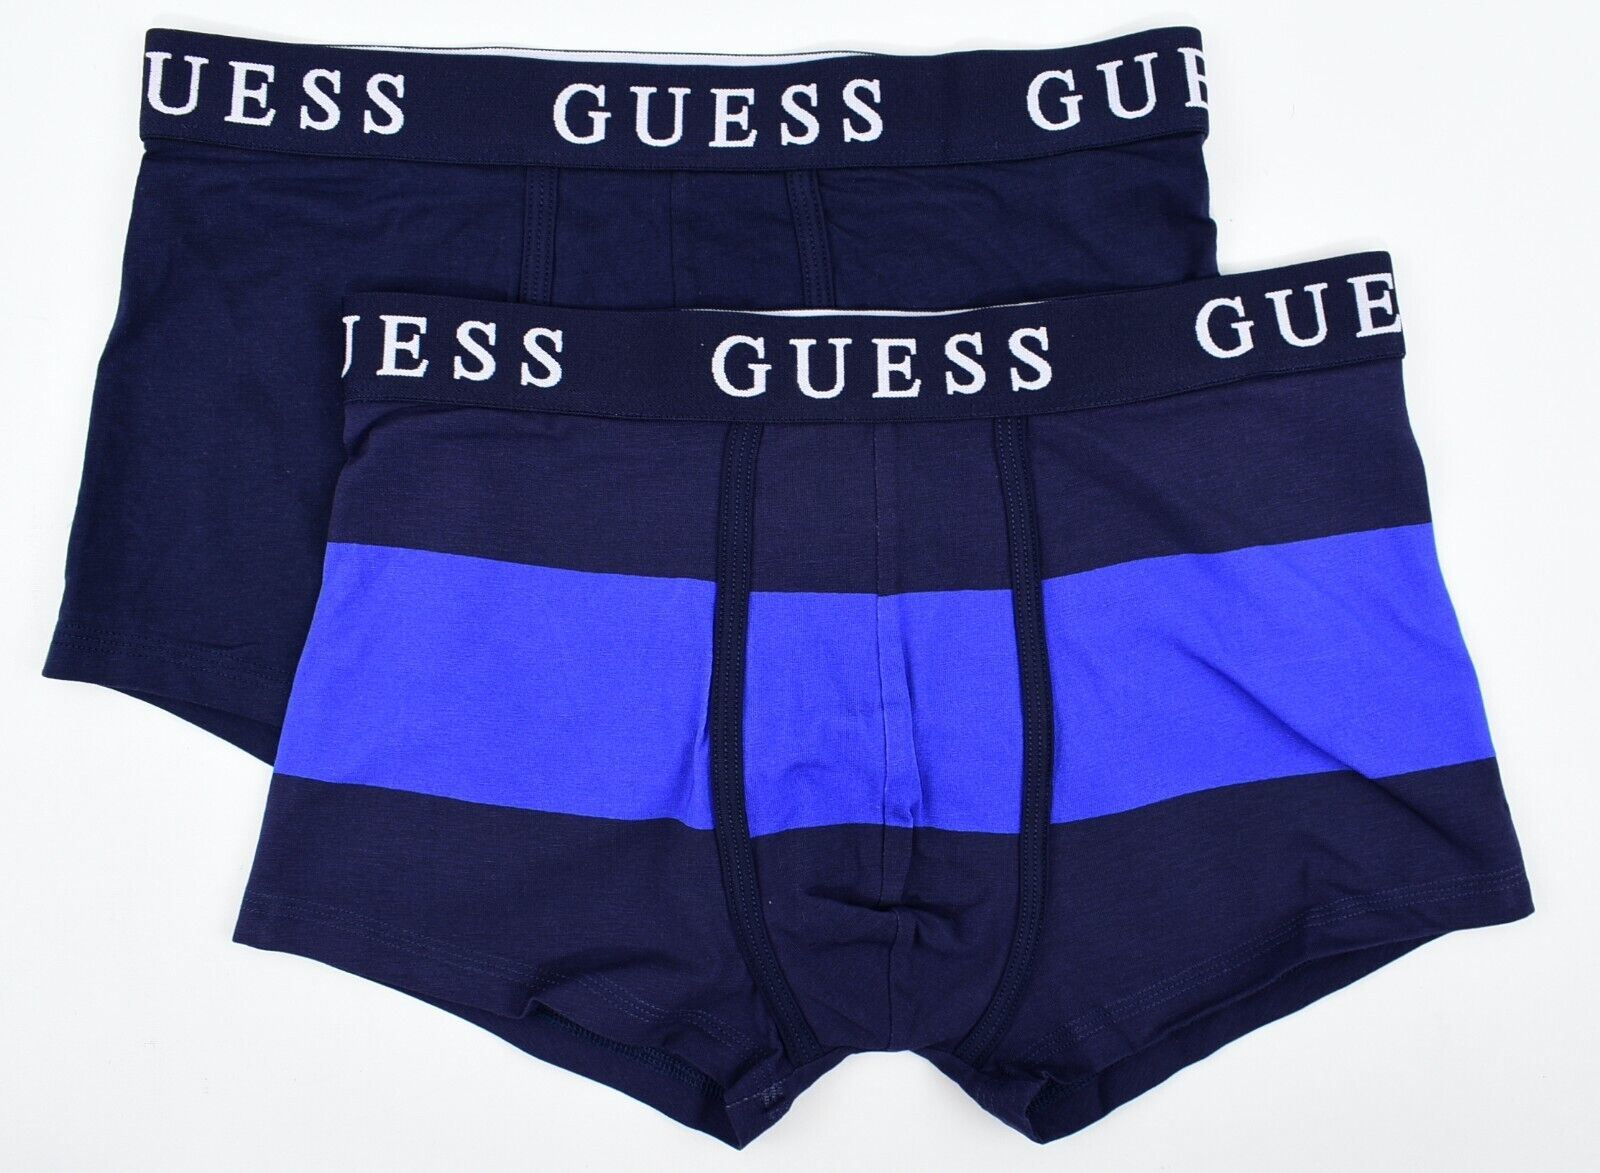 GUESS Underwear: Men's 3-Pack Logo Boxer Trunks, Grey/Navy Blue/Blue, size SMALL